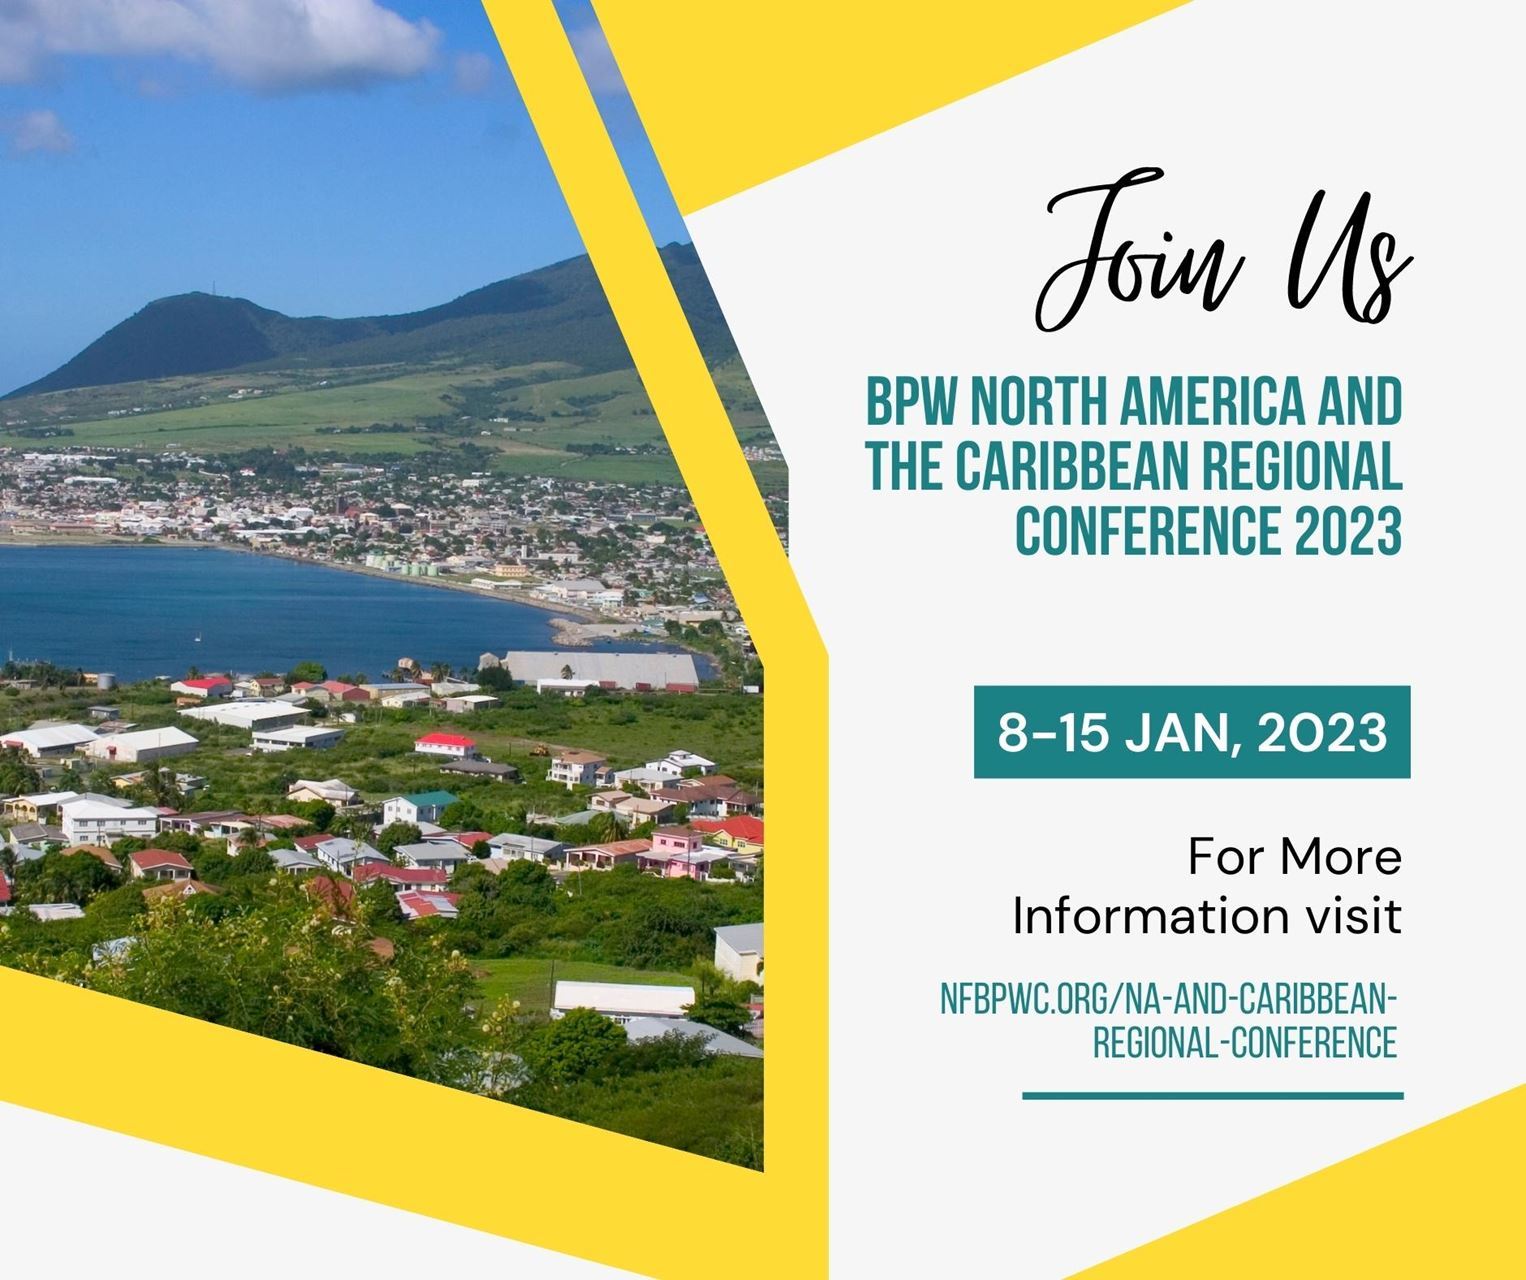 Join us in St. Kitts!